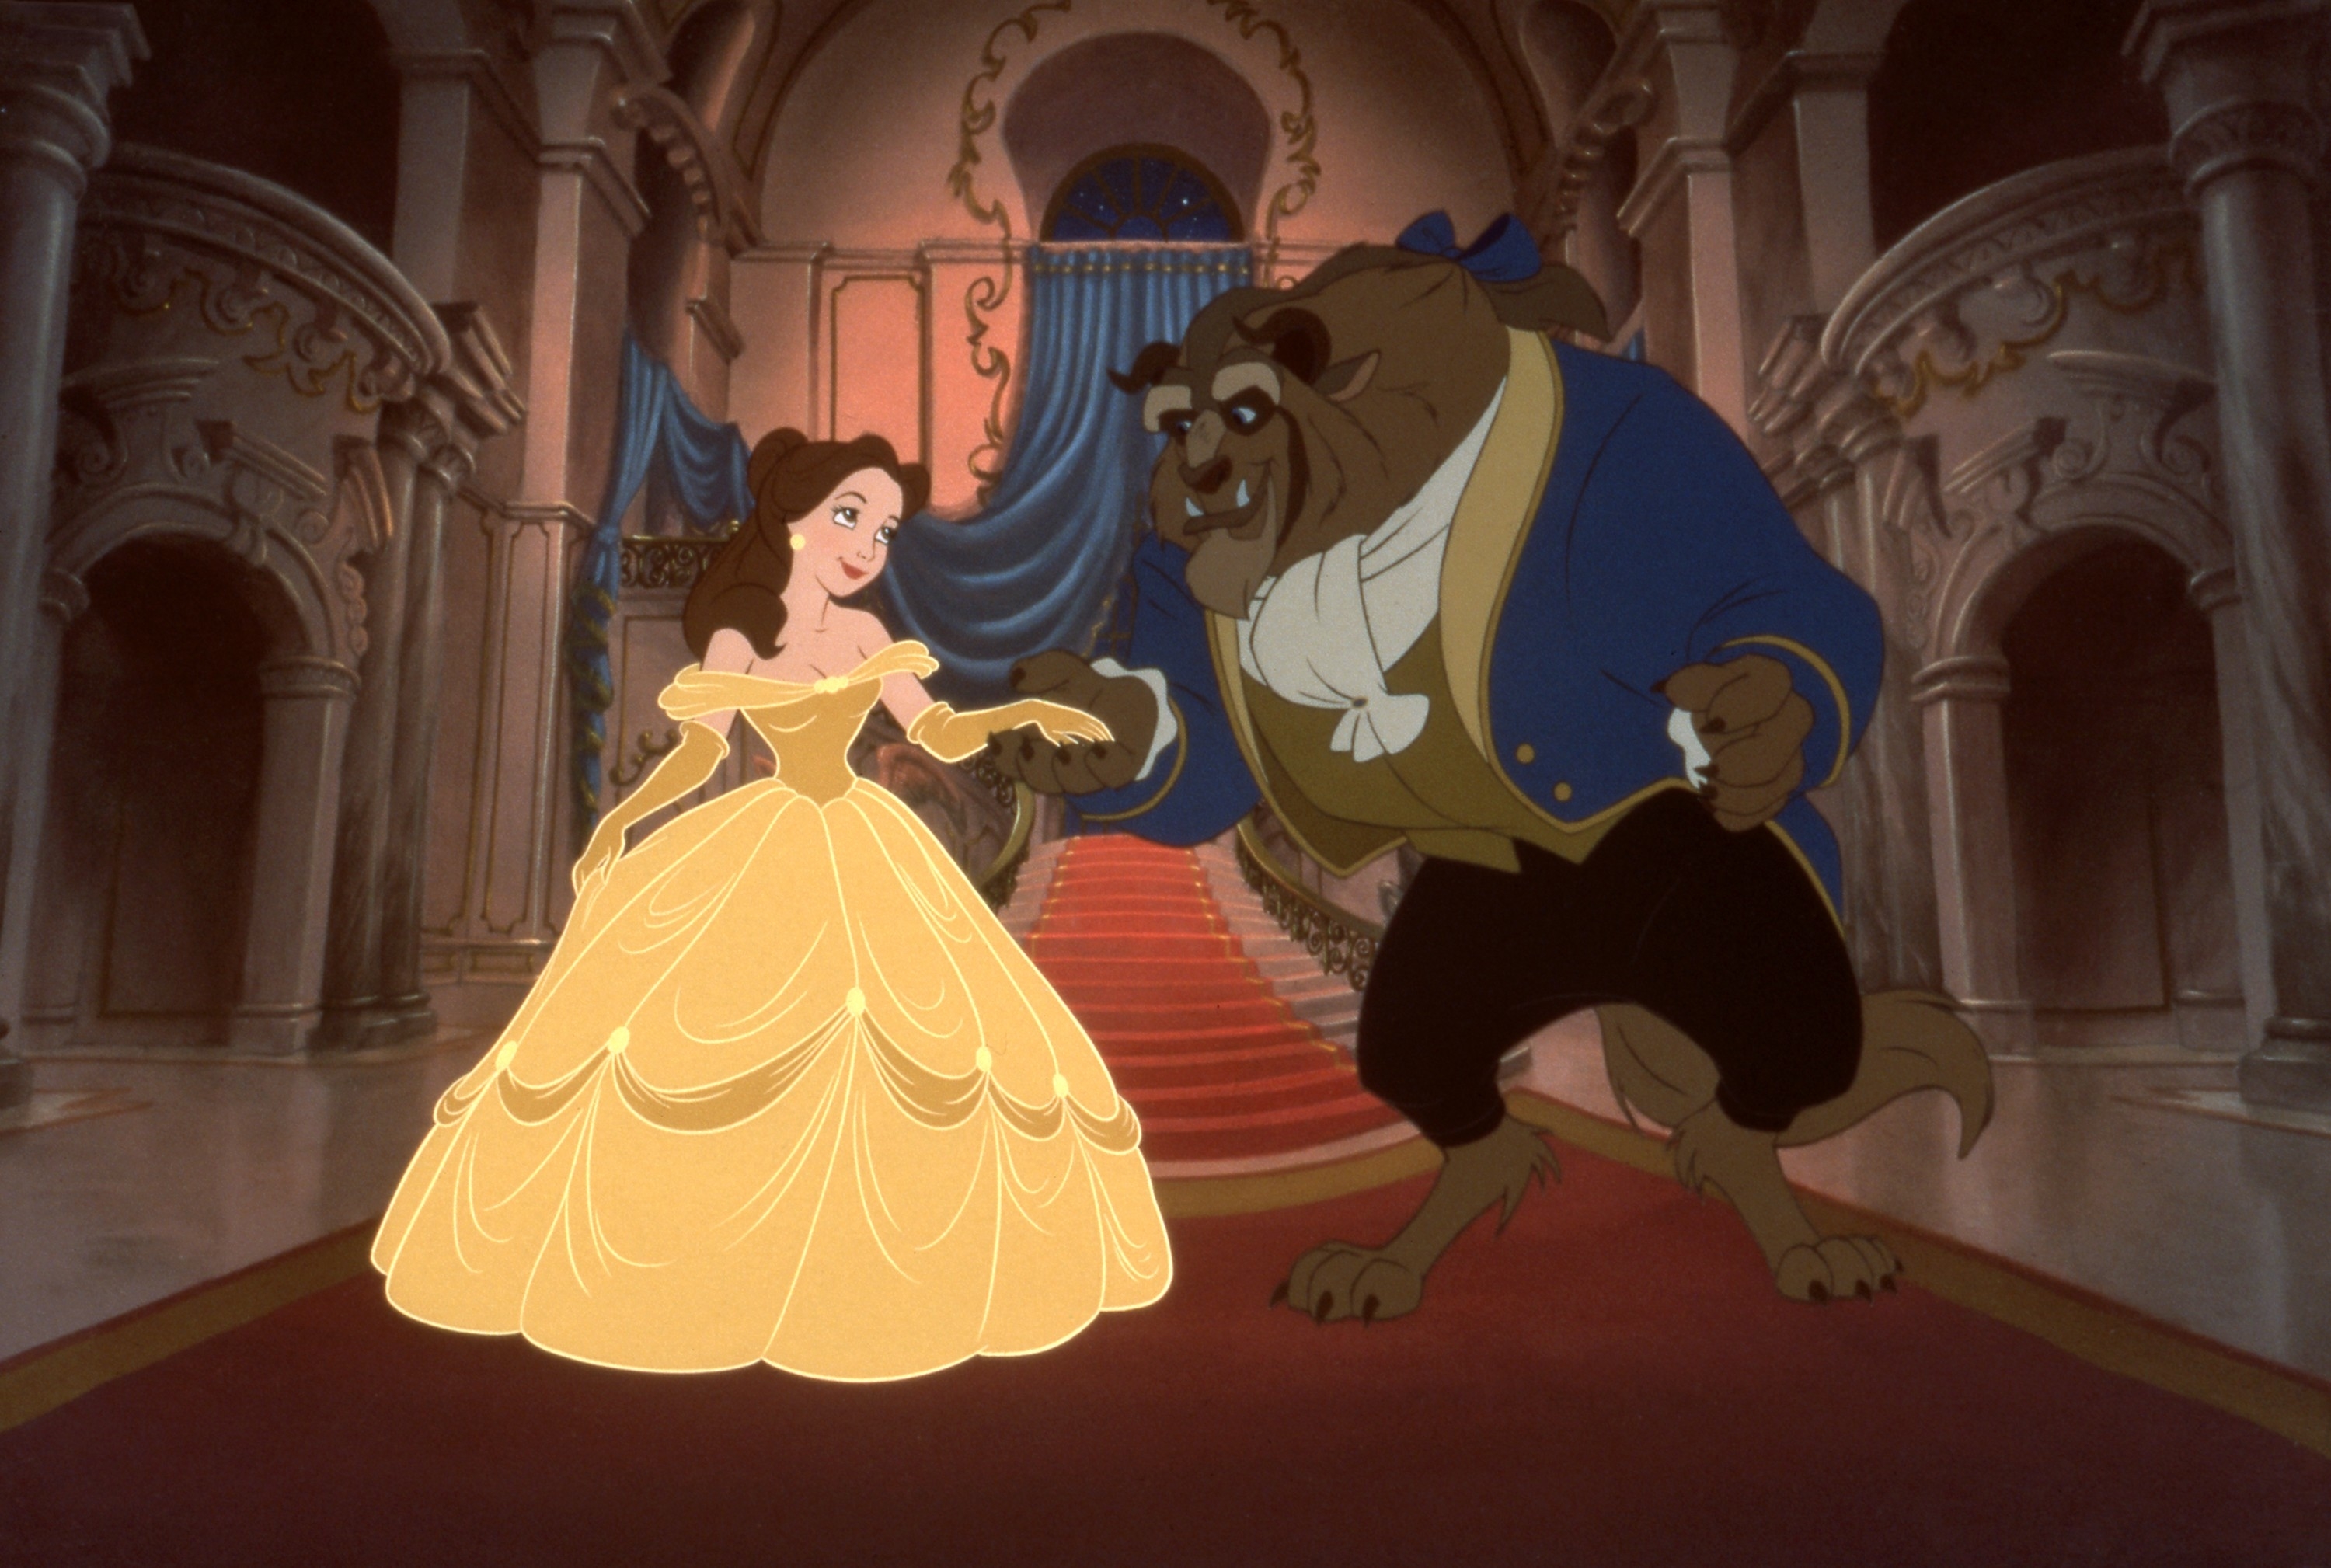 Animated characters Belle in a yellow gown and the Beast in a blue coat engaging in a dance in a grand ballroom